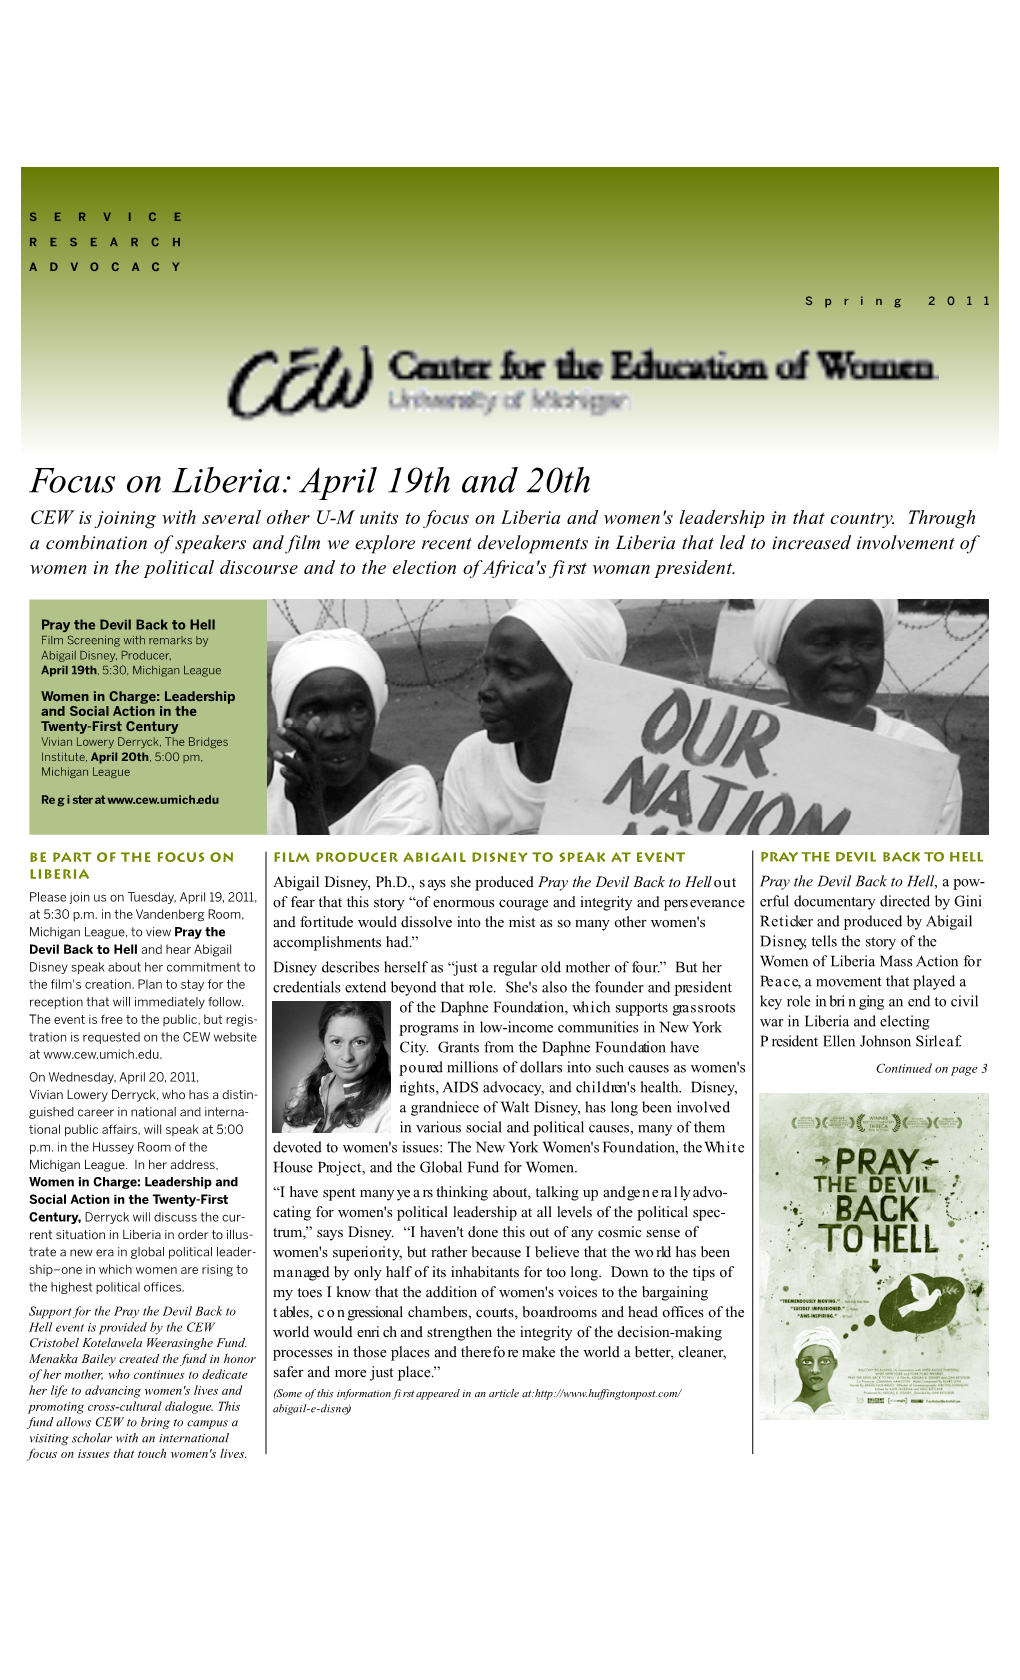 Focus on Liberia: April 19Th and 20Th CEW Is Joining with Sev E Ral Other U-M Units to Focus on Liberia and Women's Leadership in That Country